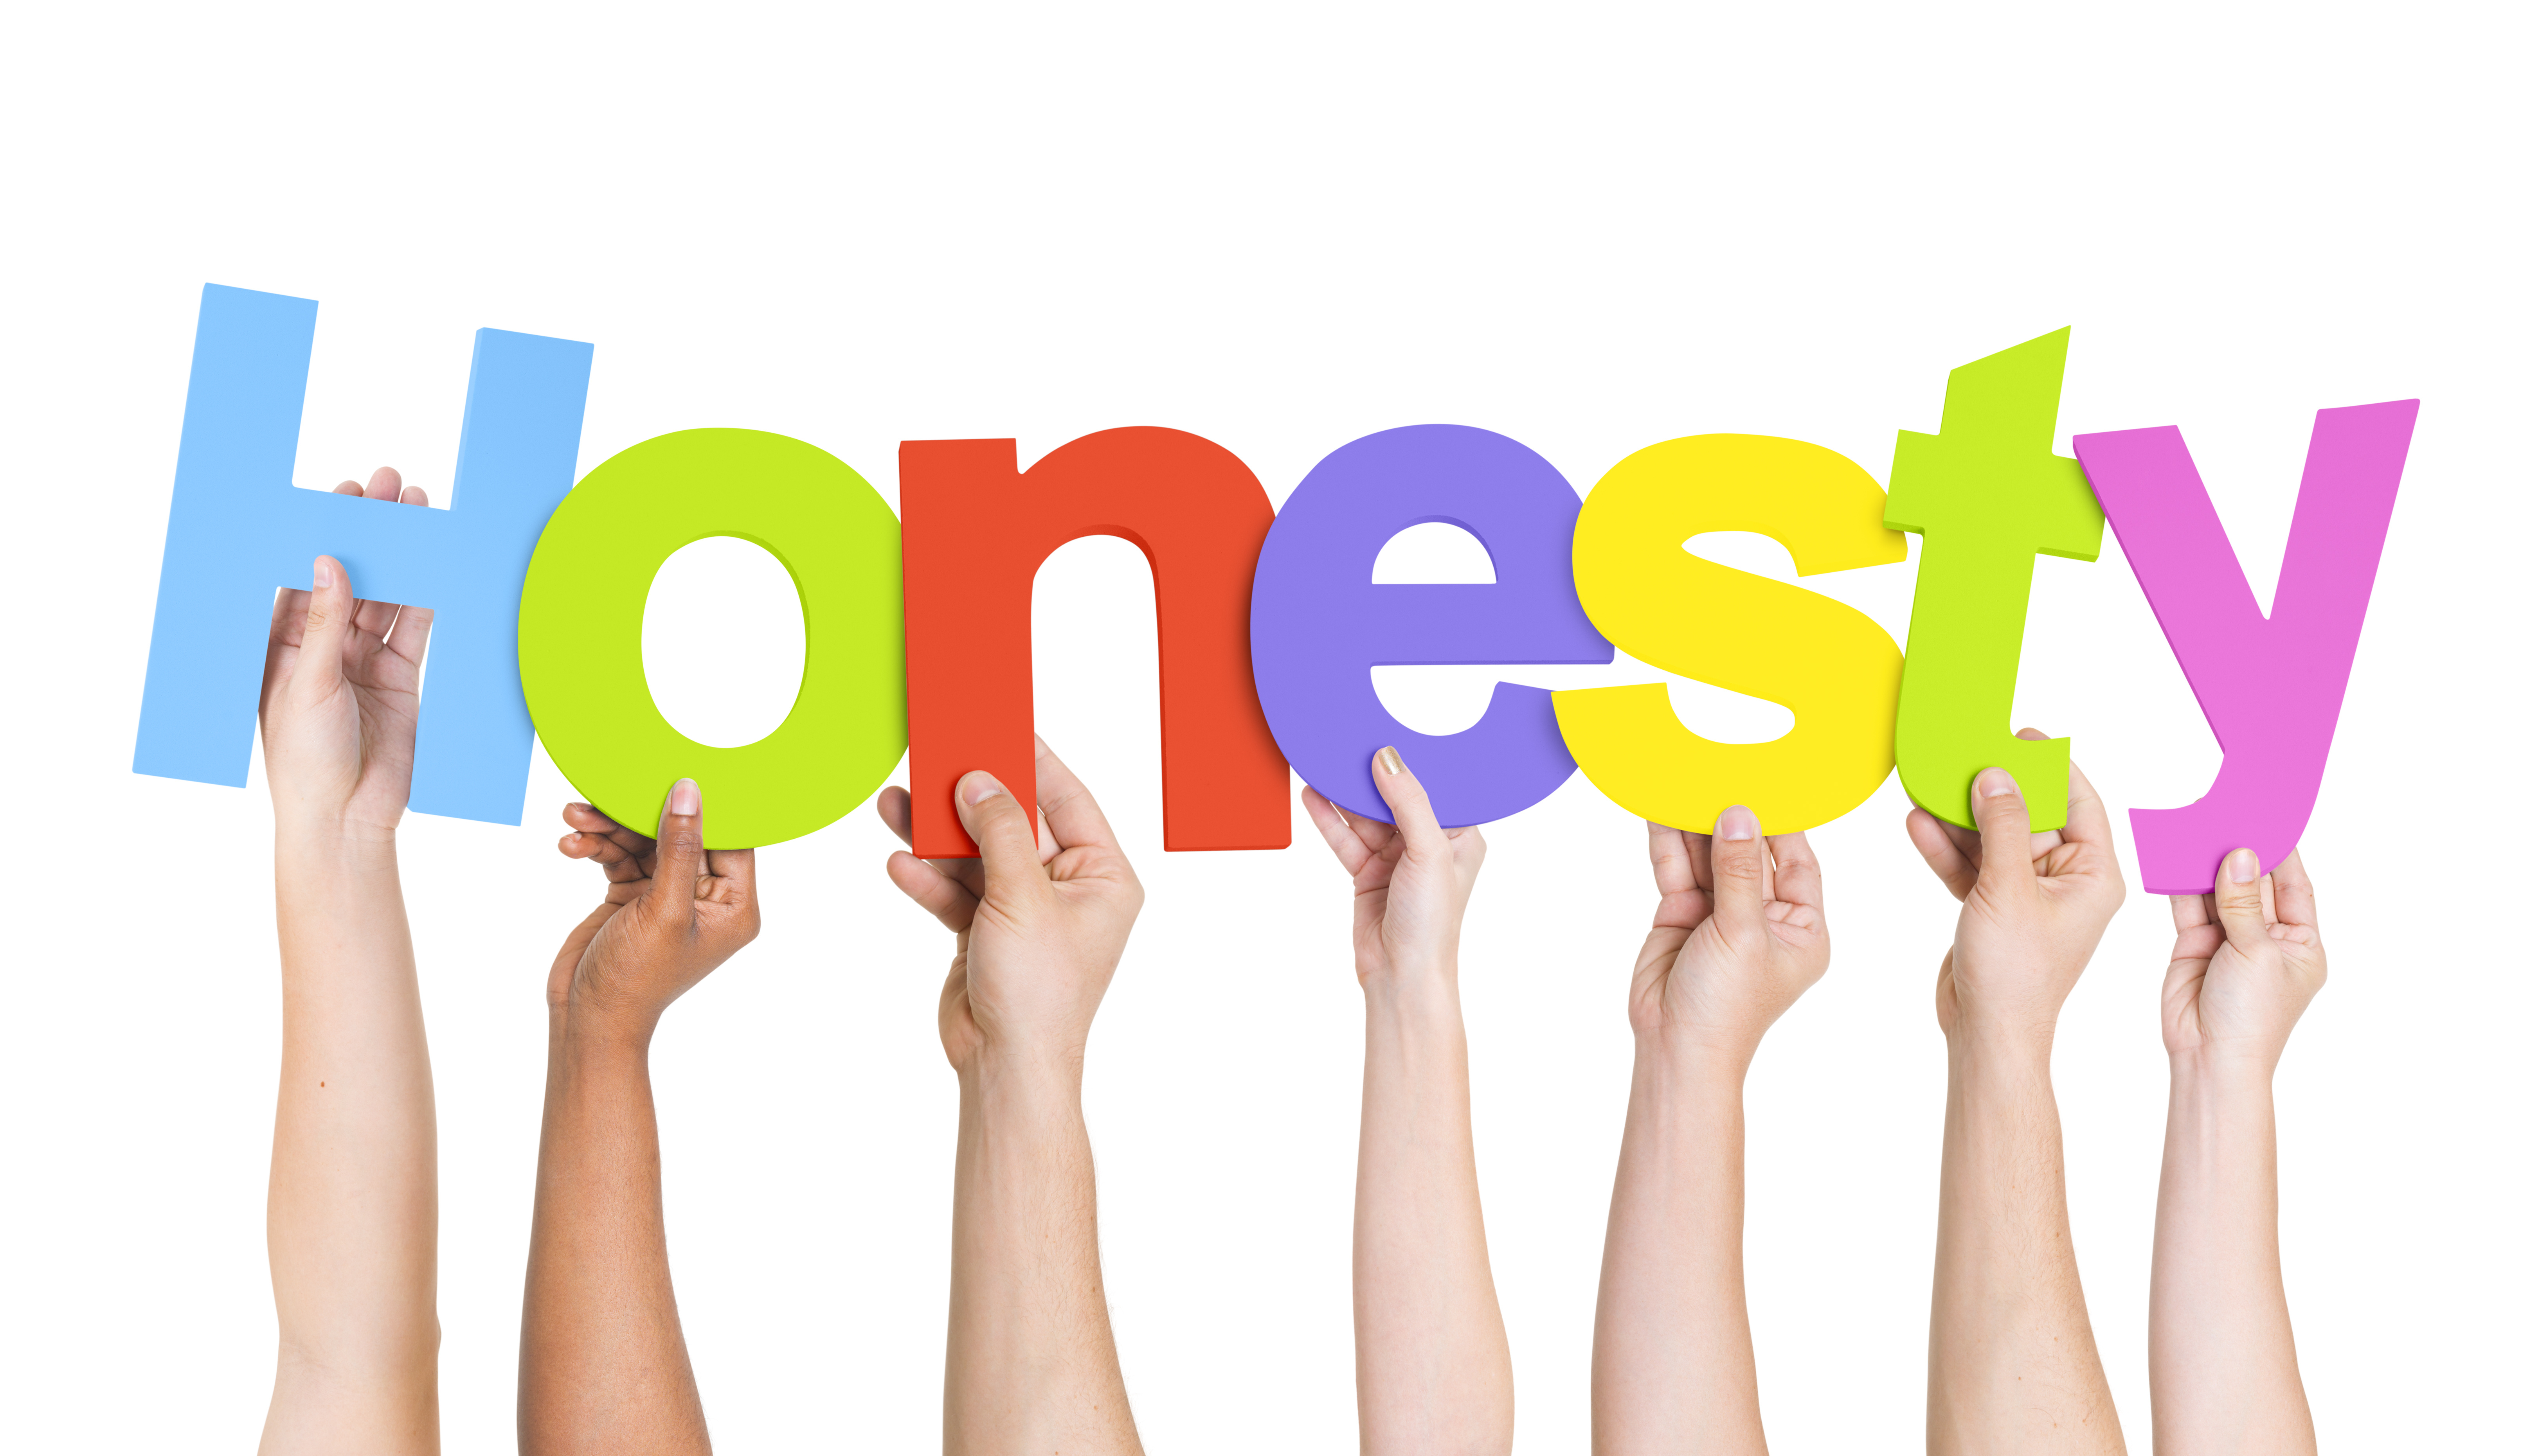 honesty pictures for kids clipart